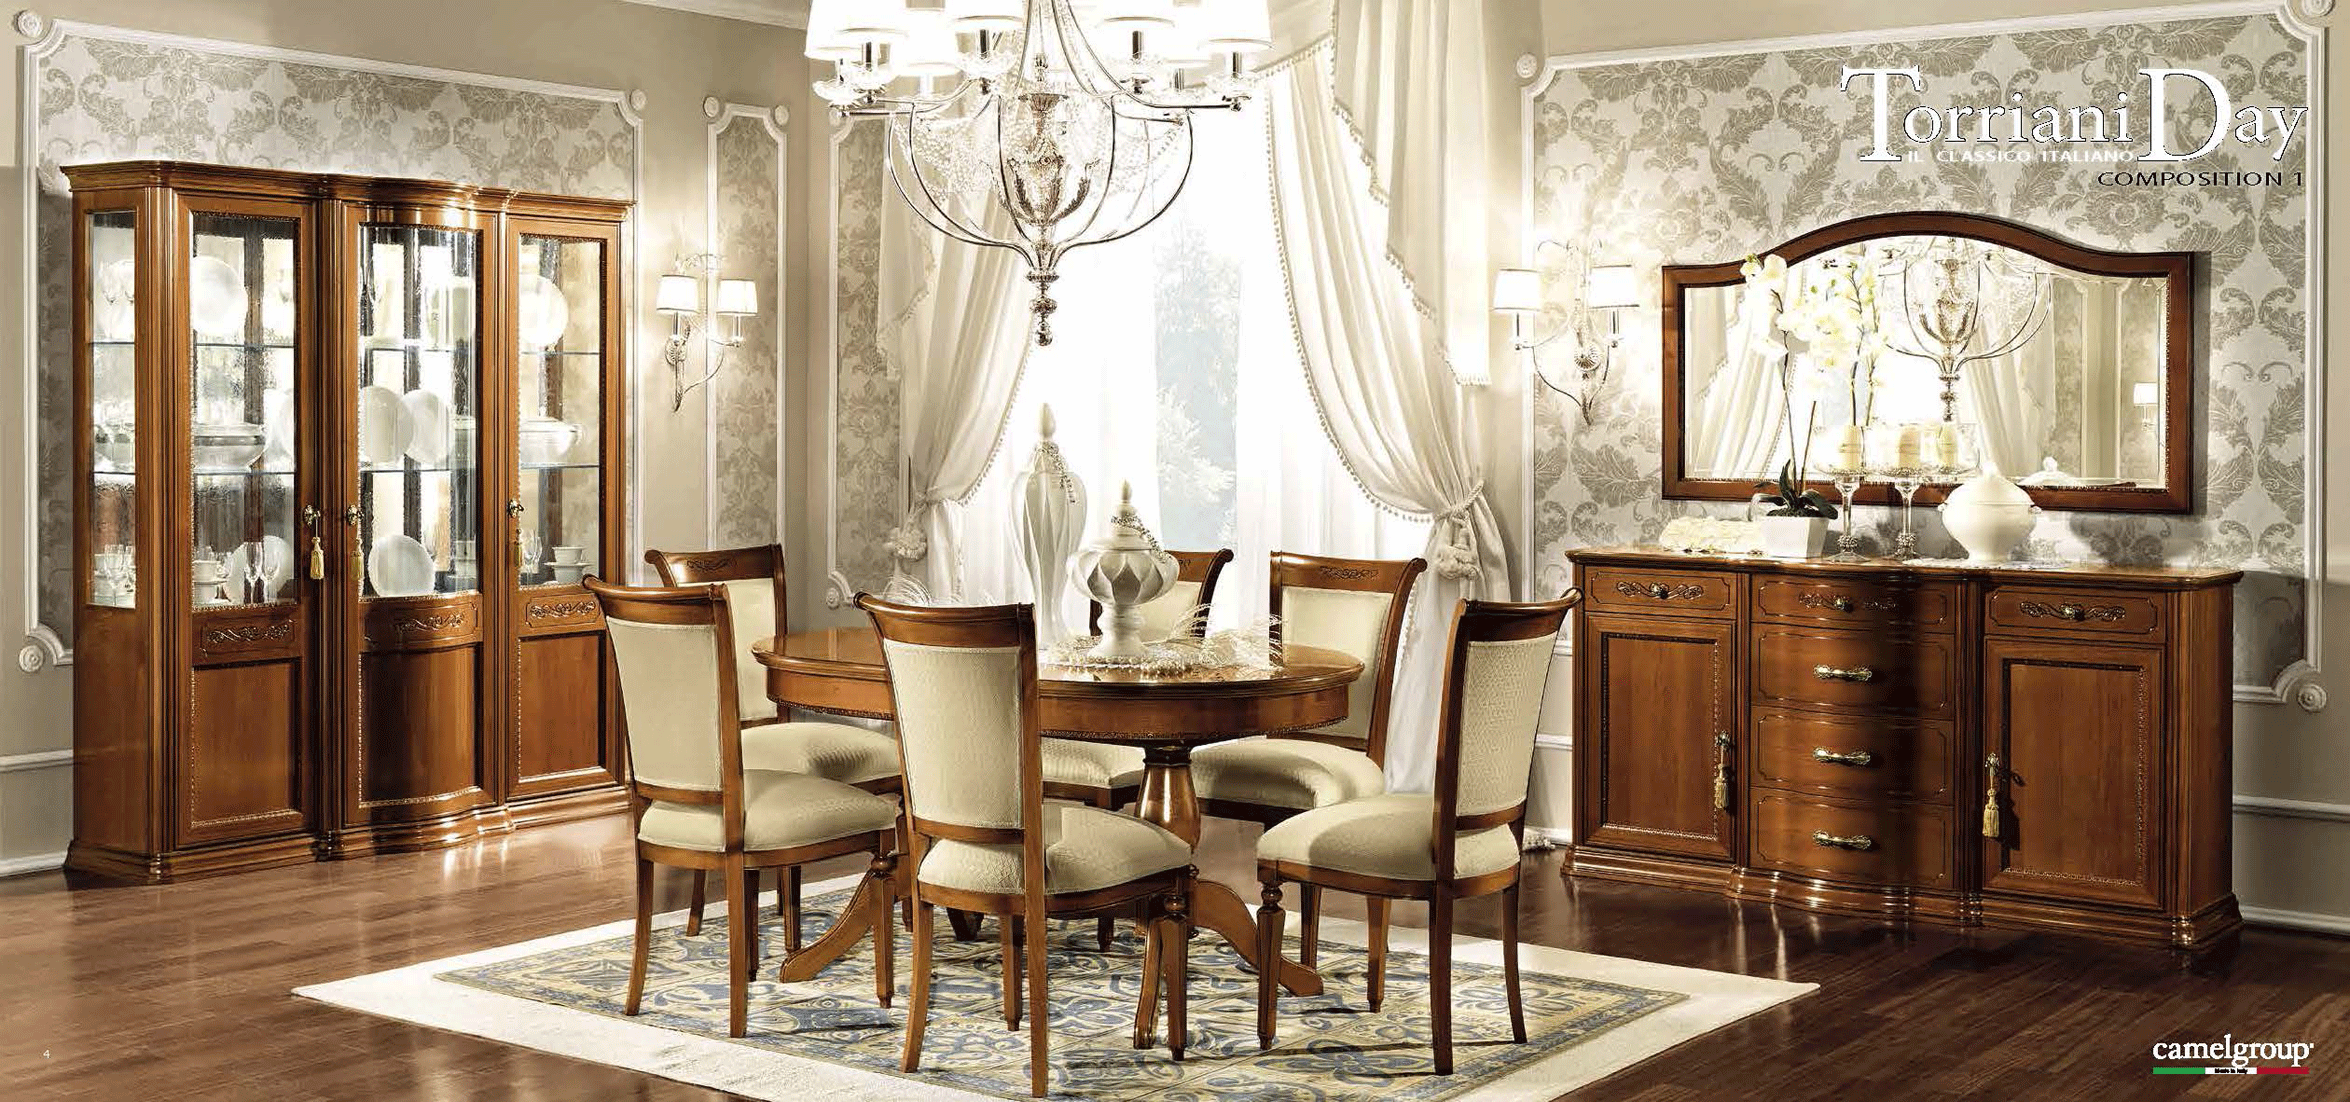 Dining Room Furniture Modern Dining Room Sets Torriani Day